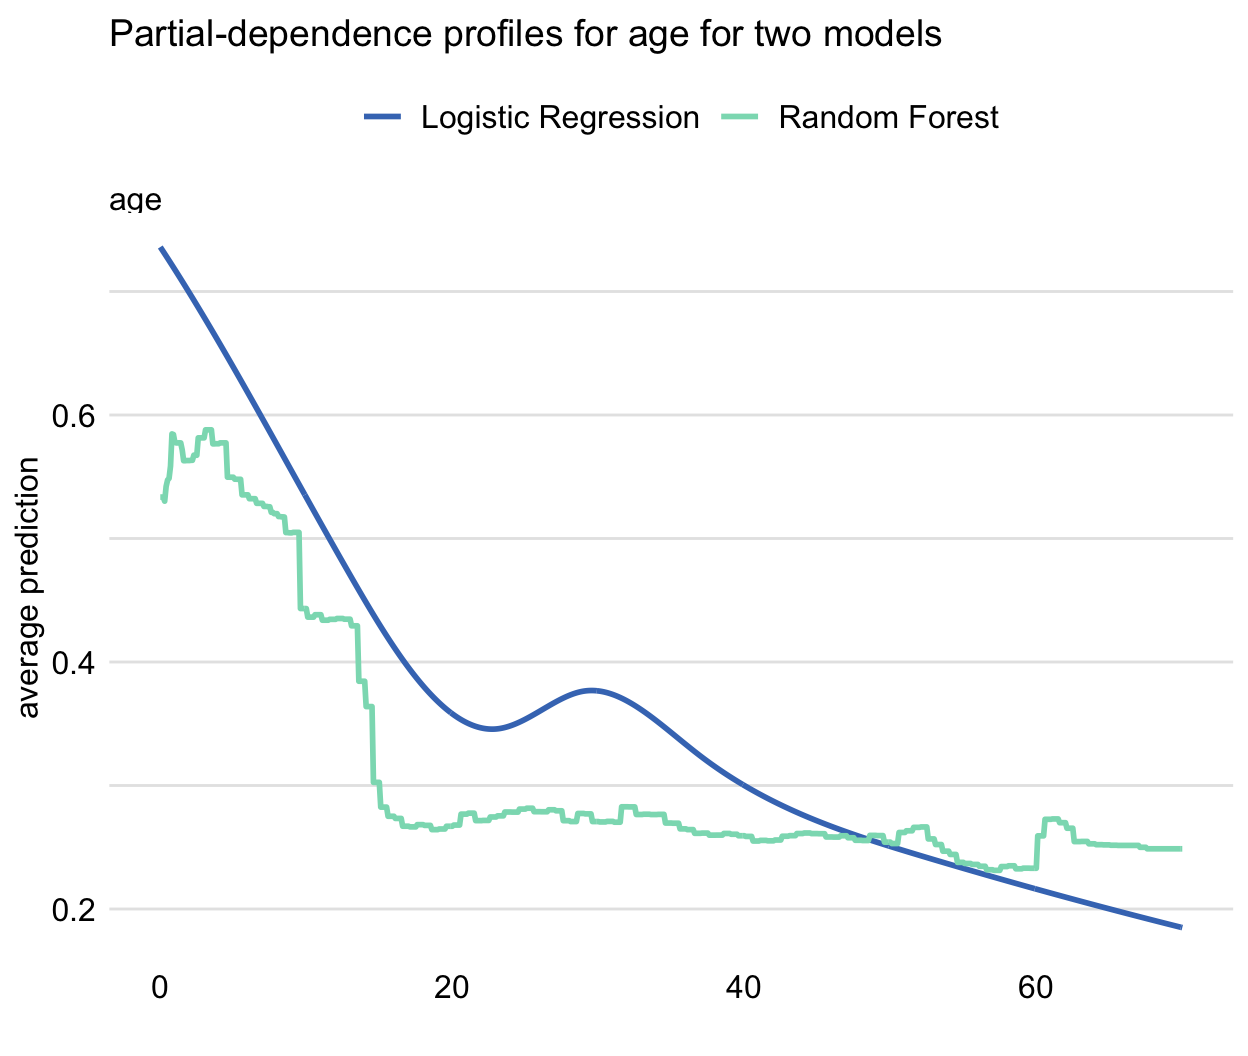 Partial-dependence profiles for age for the random forest (green line) and logistic regression (blue line) models for the Titanic dataset.